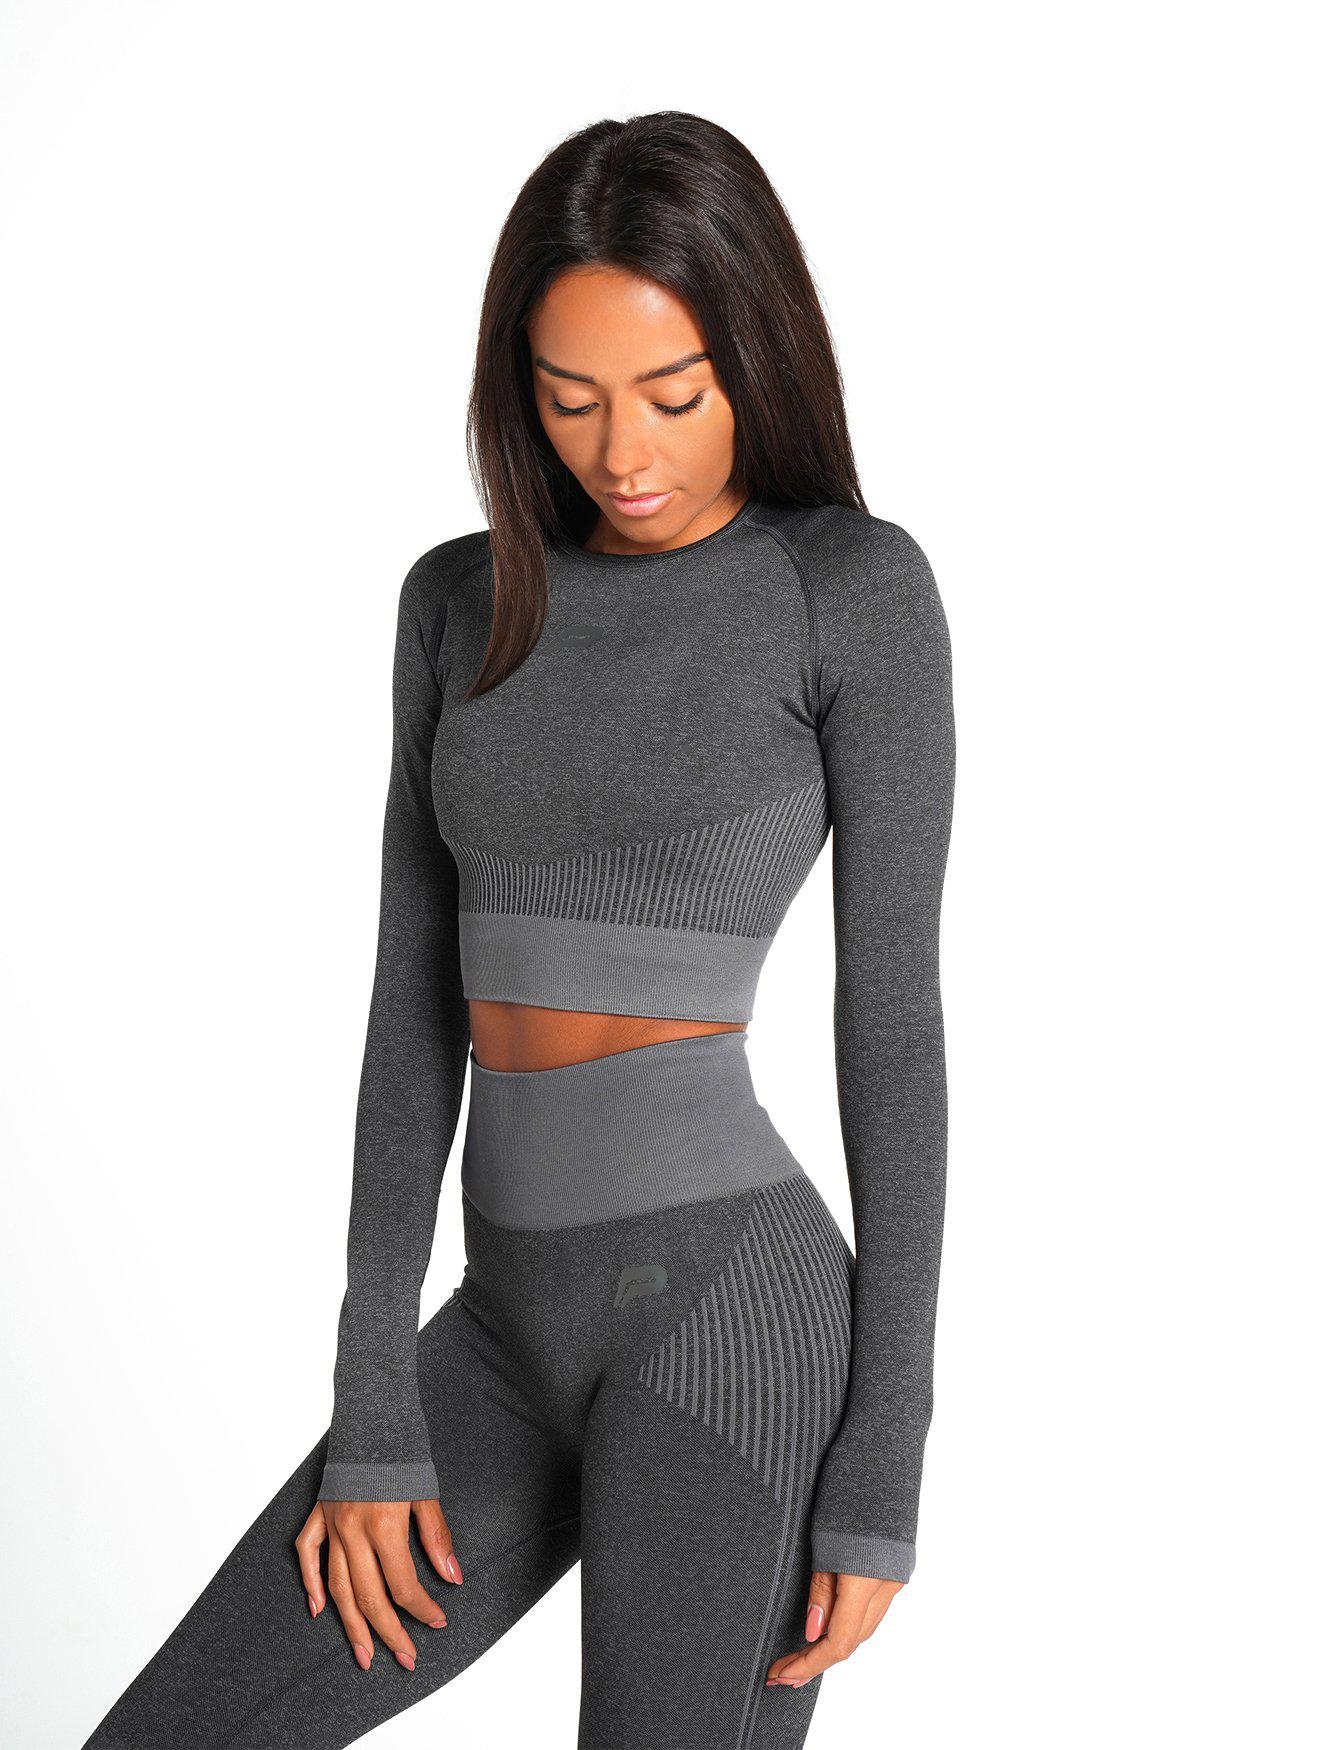 Charcoal Seamless Long Sleeve Cropped Gym Top